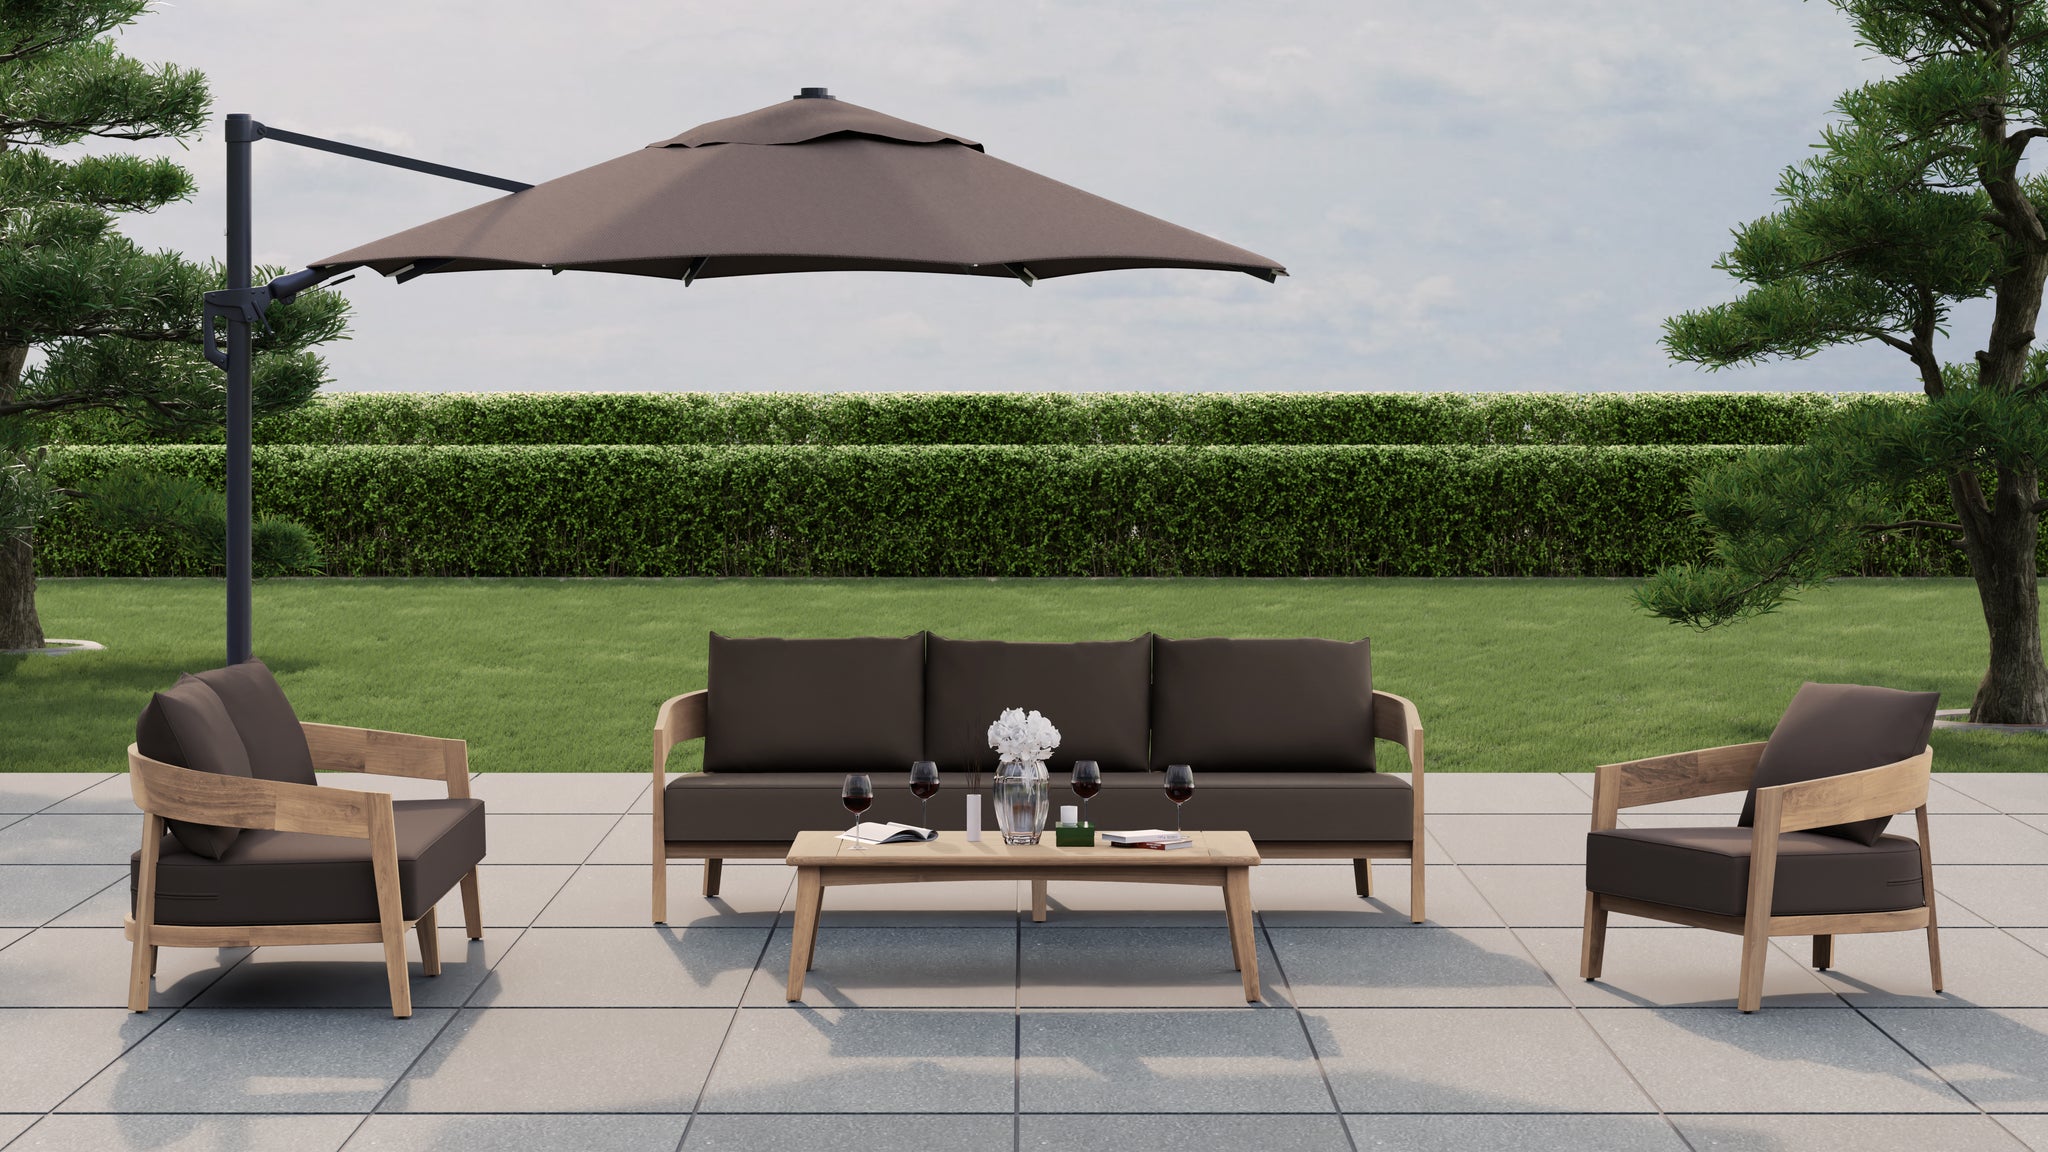 Windsor 3 Seater, 2 Seater Sofa, Lounge Armchair, Rectangular Coffee Table & Cantilever Parasol